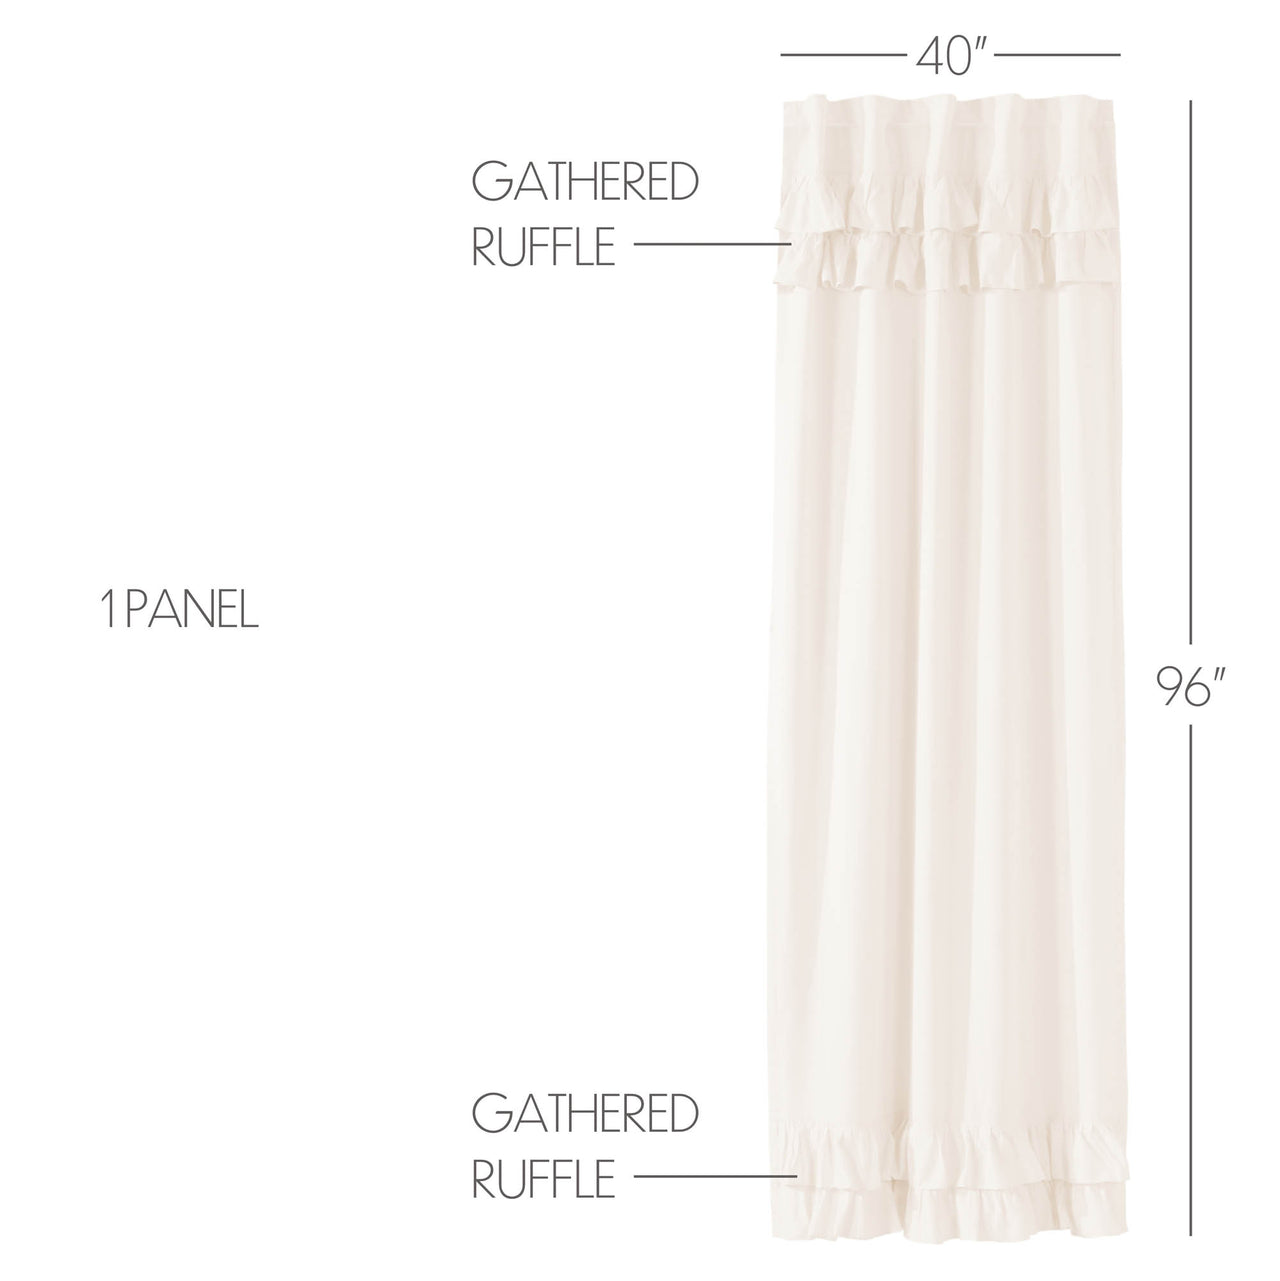 Simple Life Flax Antique White Ruffled Panel Curtain 96"x40" VHC Brands